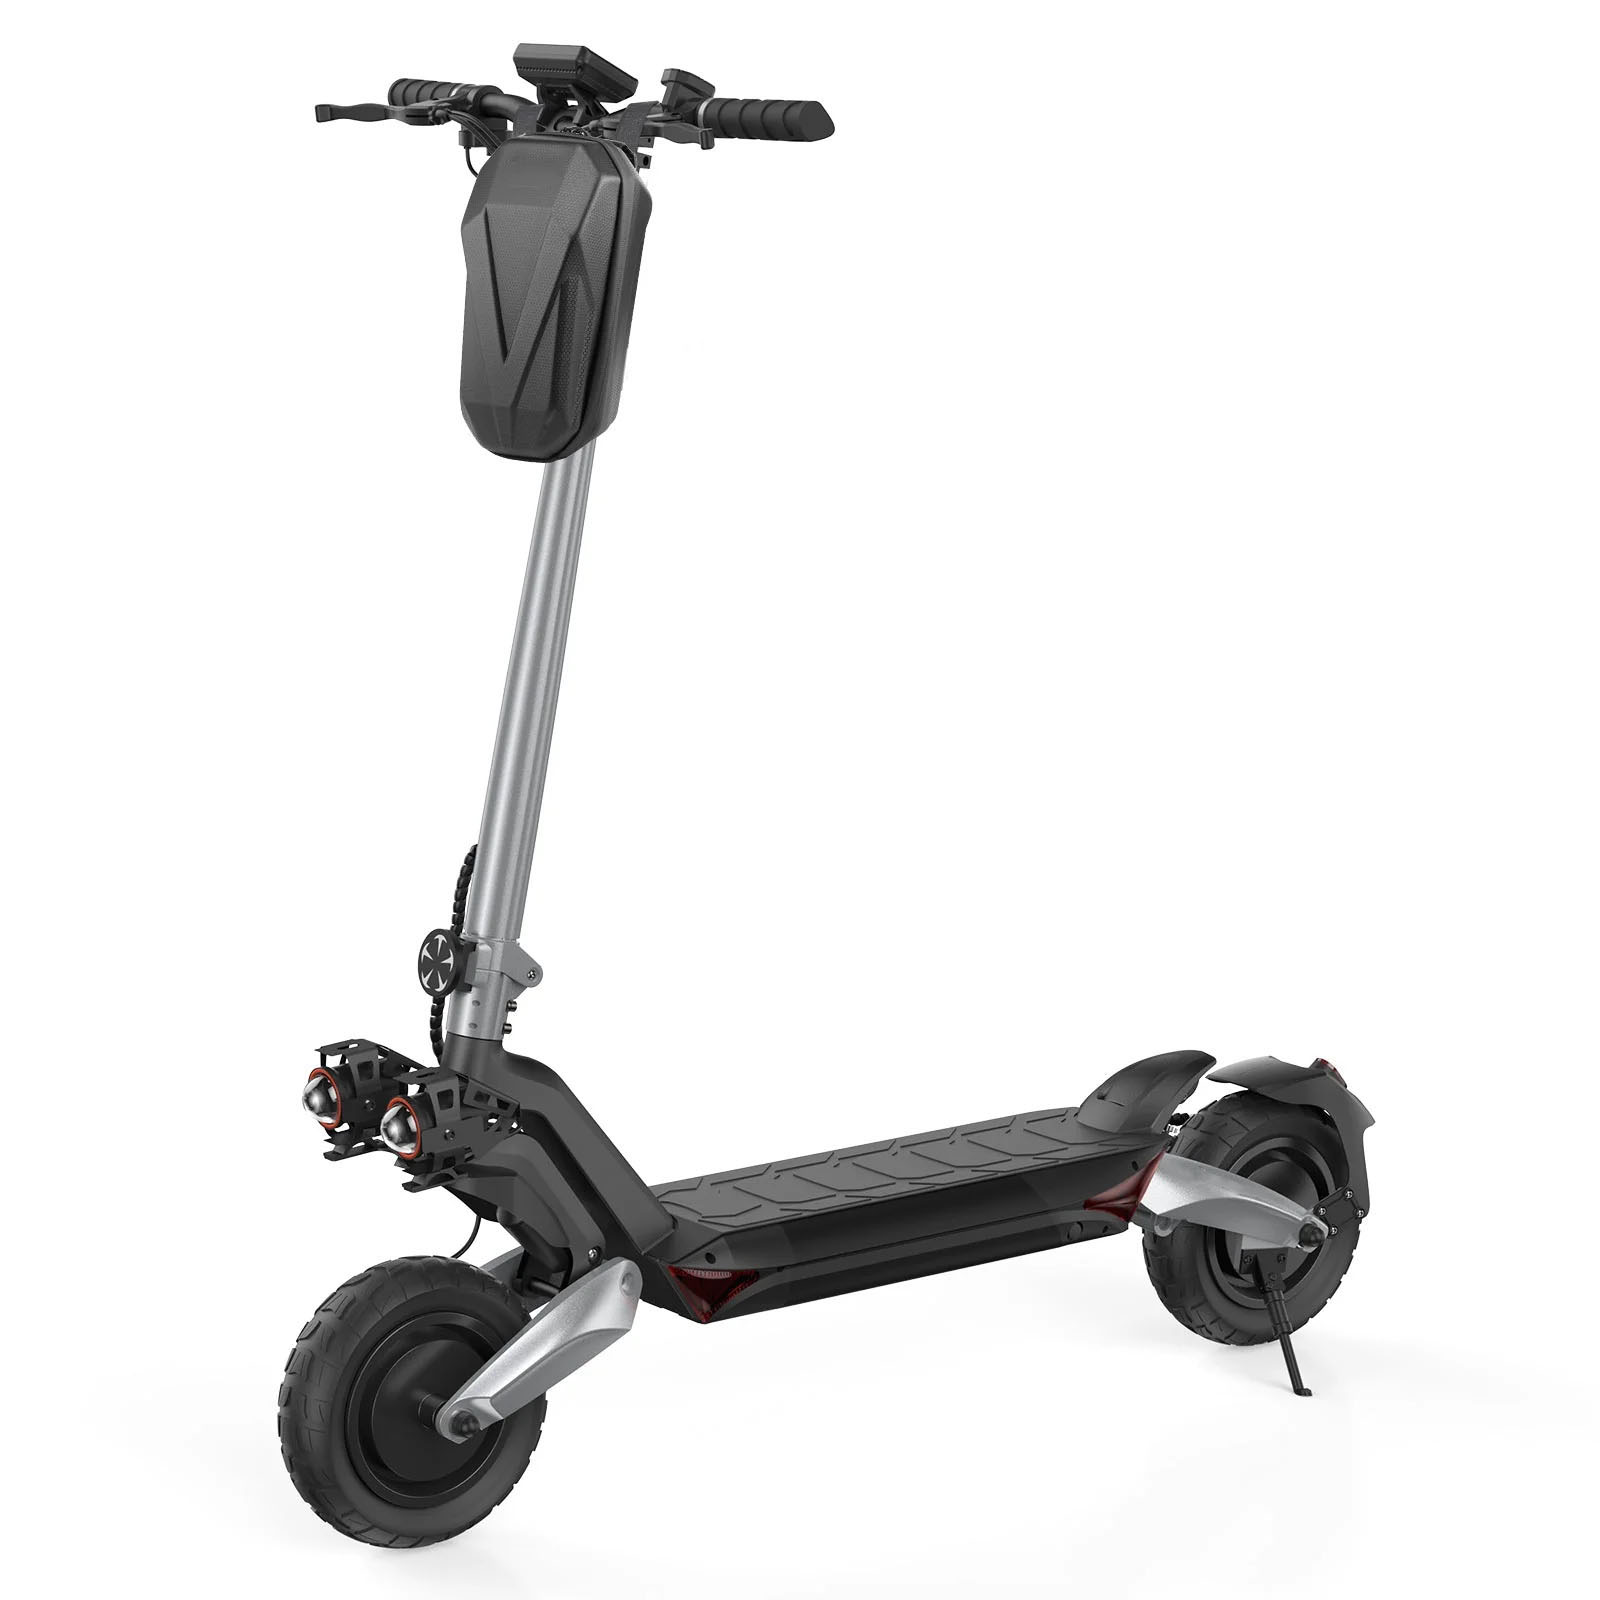 R3 Pro 1600W Dual Motors Off Road Electric Scooter